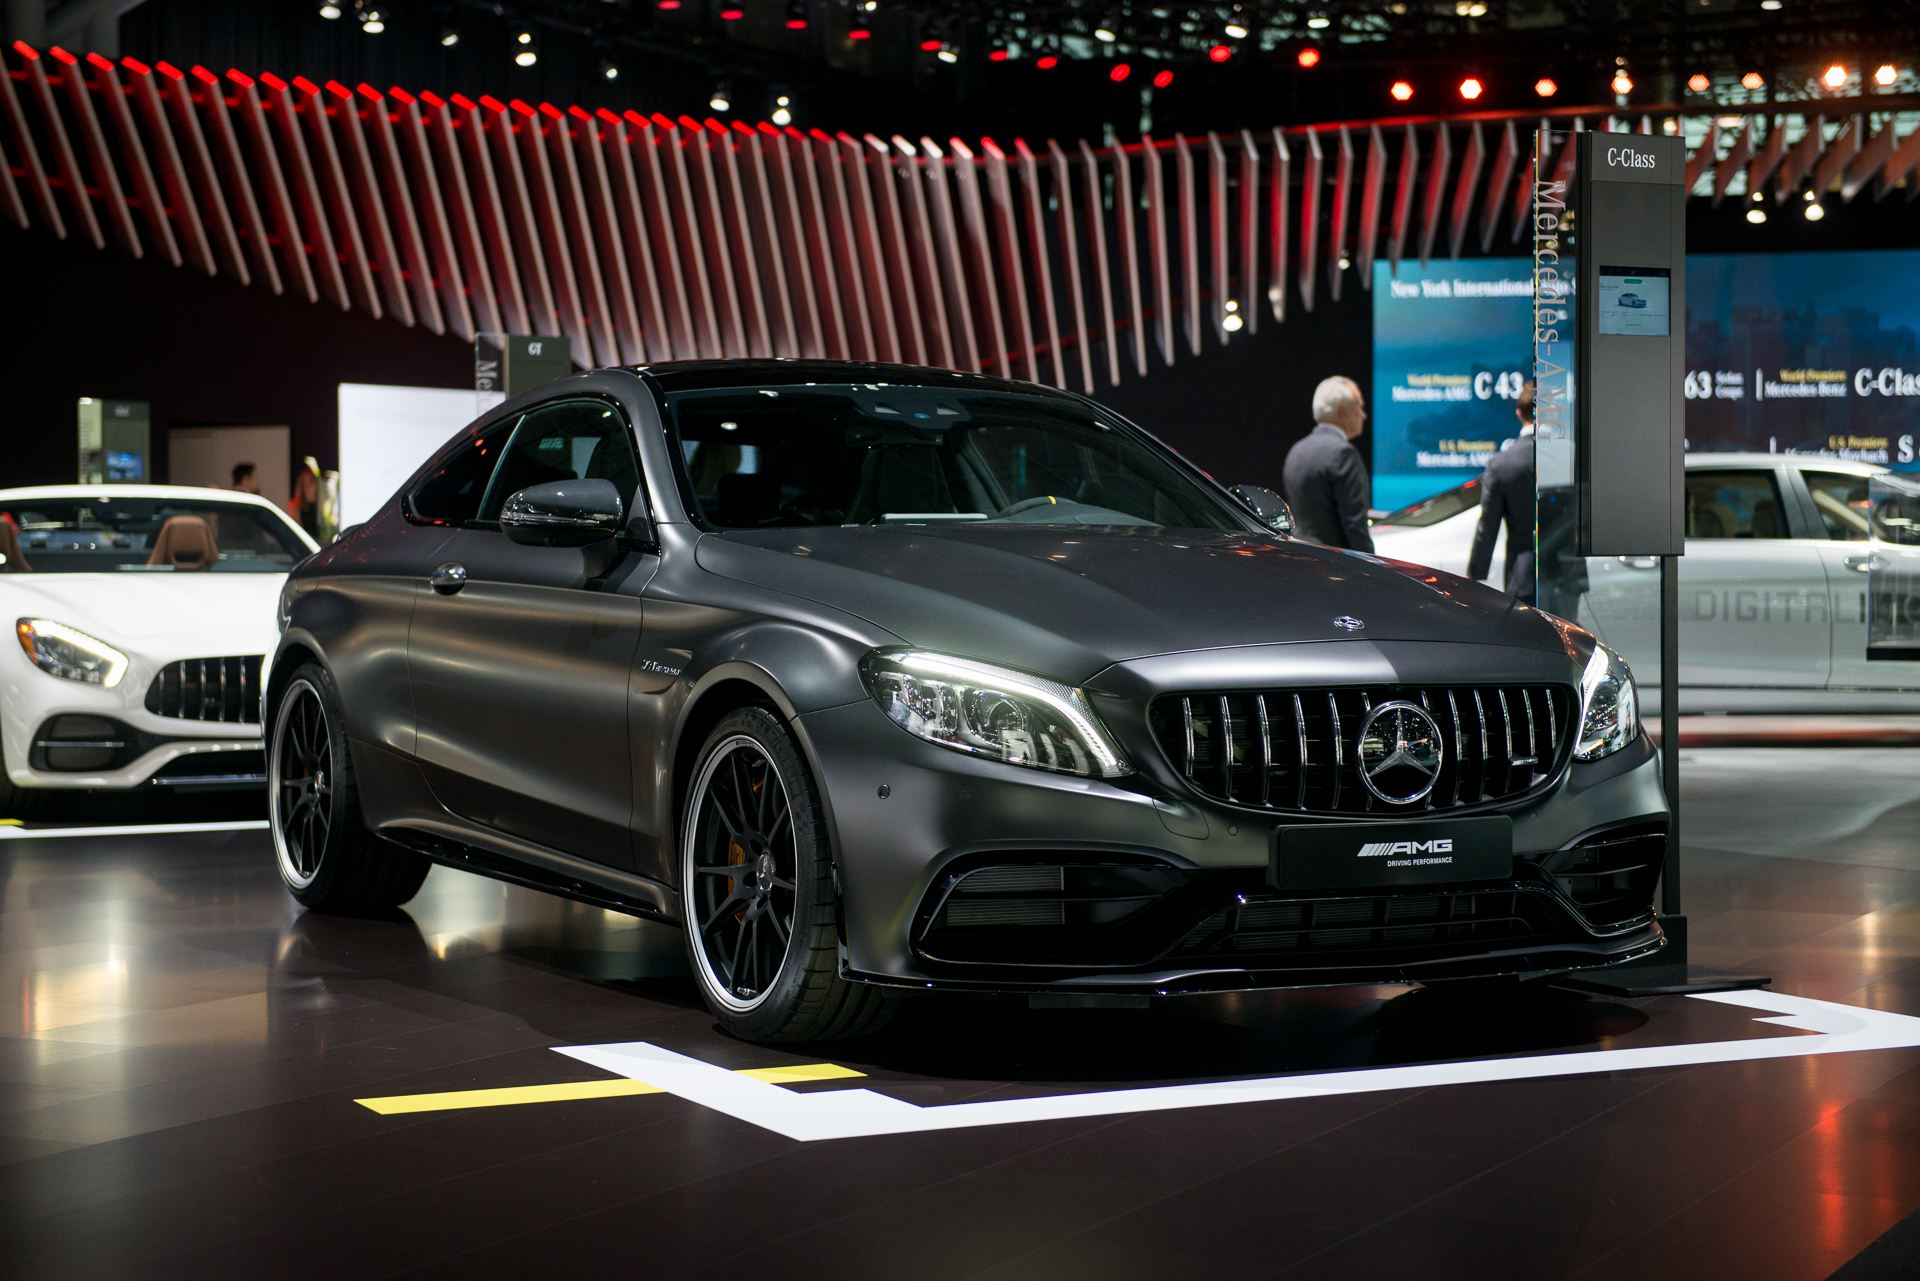 Next Generation Mercedes Amg C63 Will Be A Hybrid